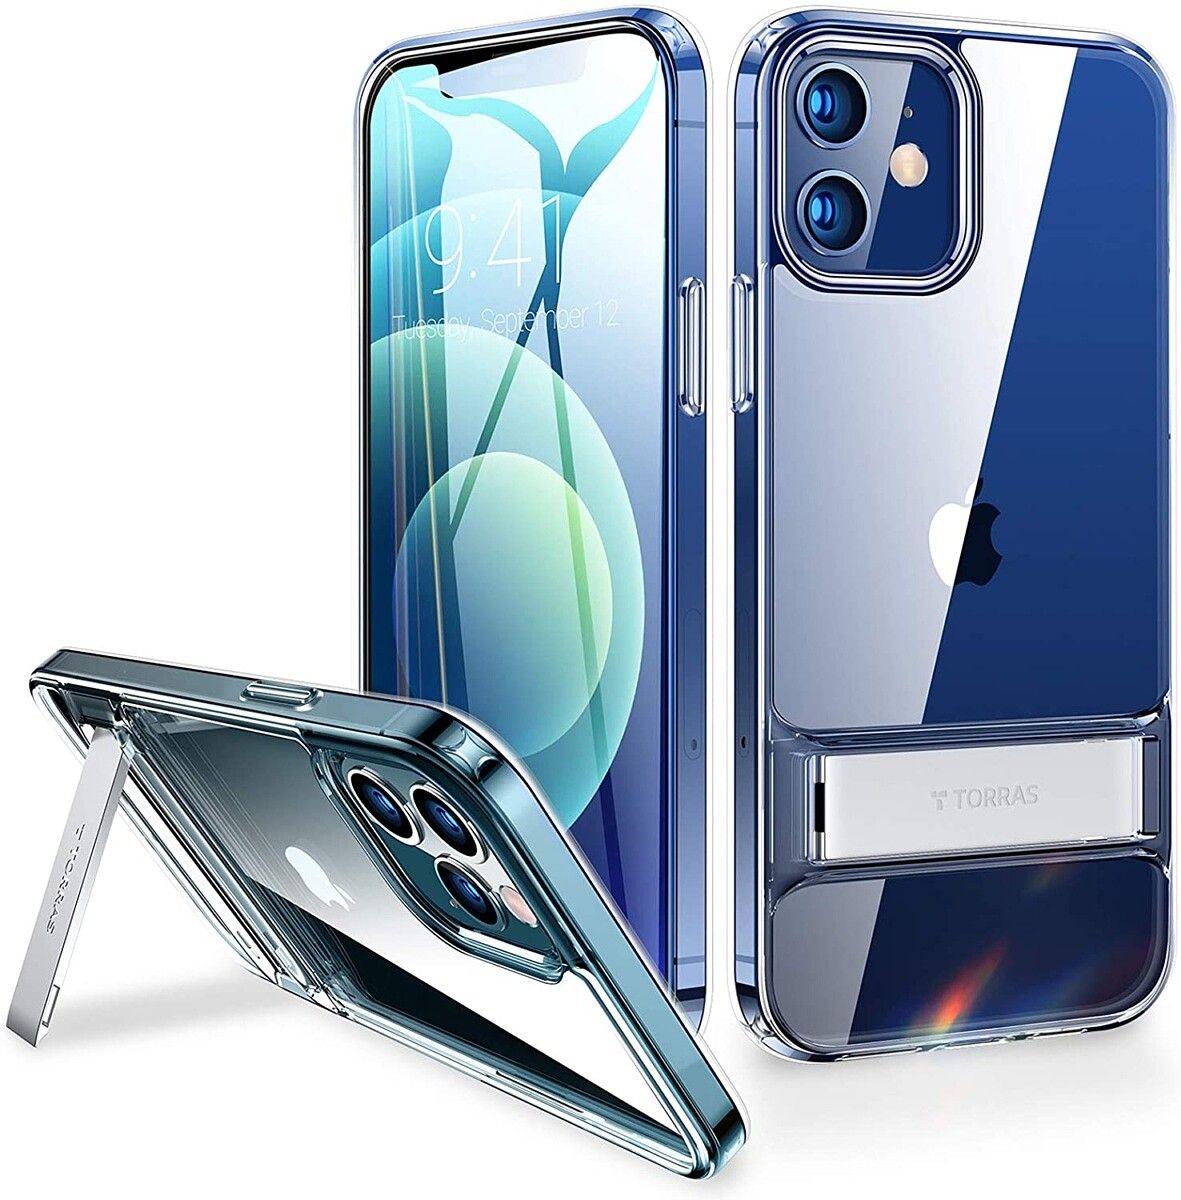 This transparent case comes with an extremely handy kickstand, which can be used for watching videos, making video calls, and anything else that will free up your hands.